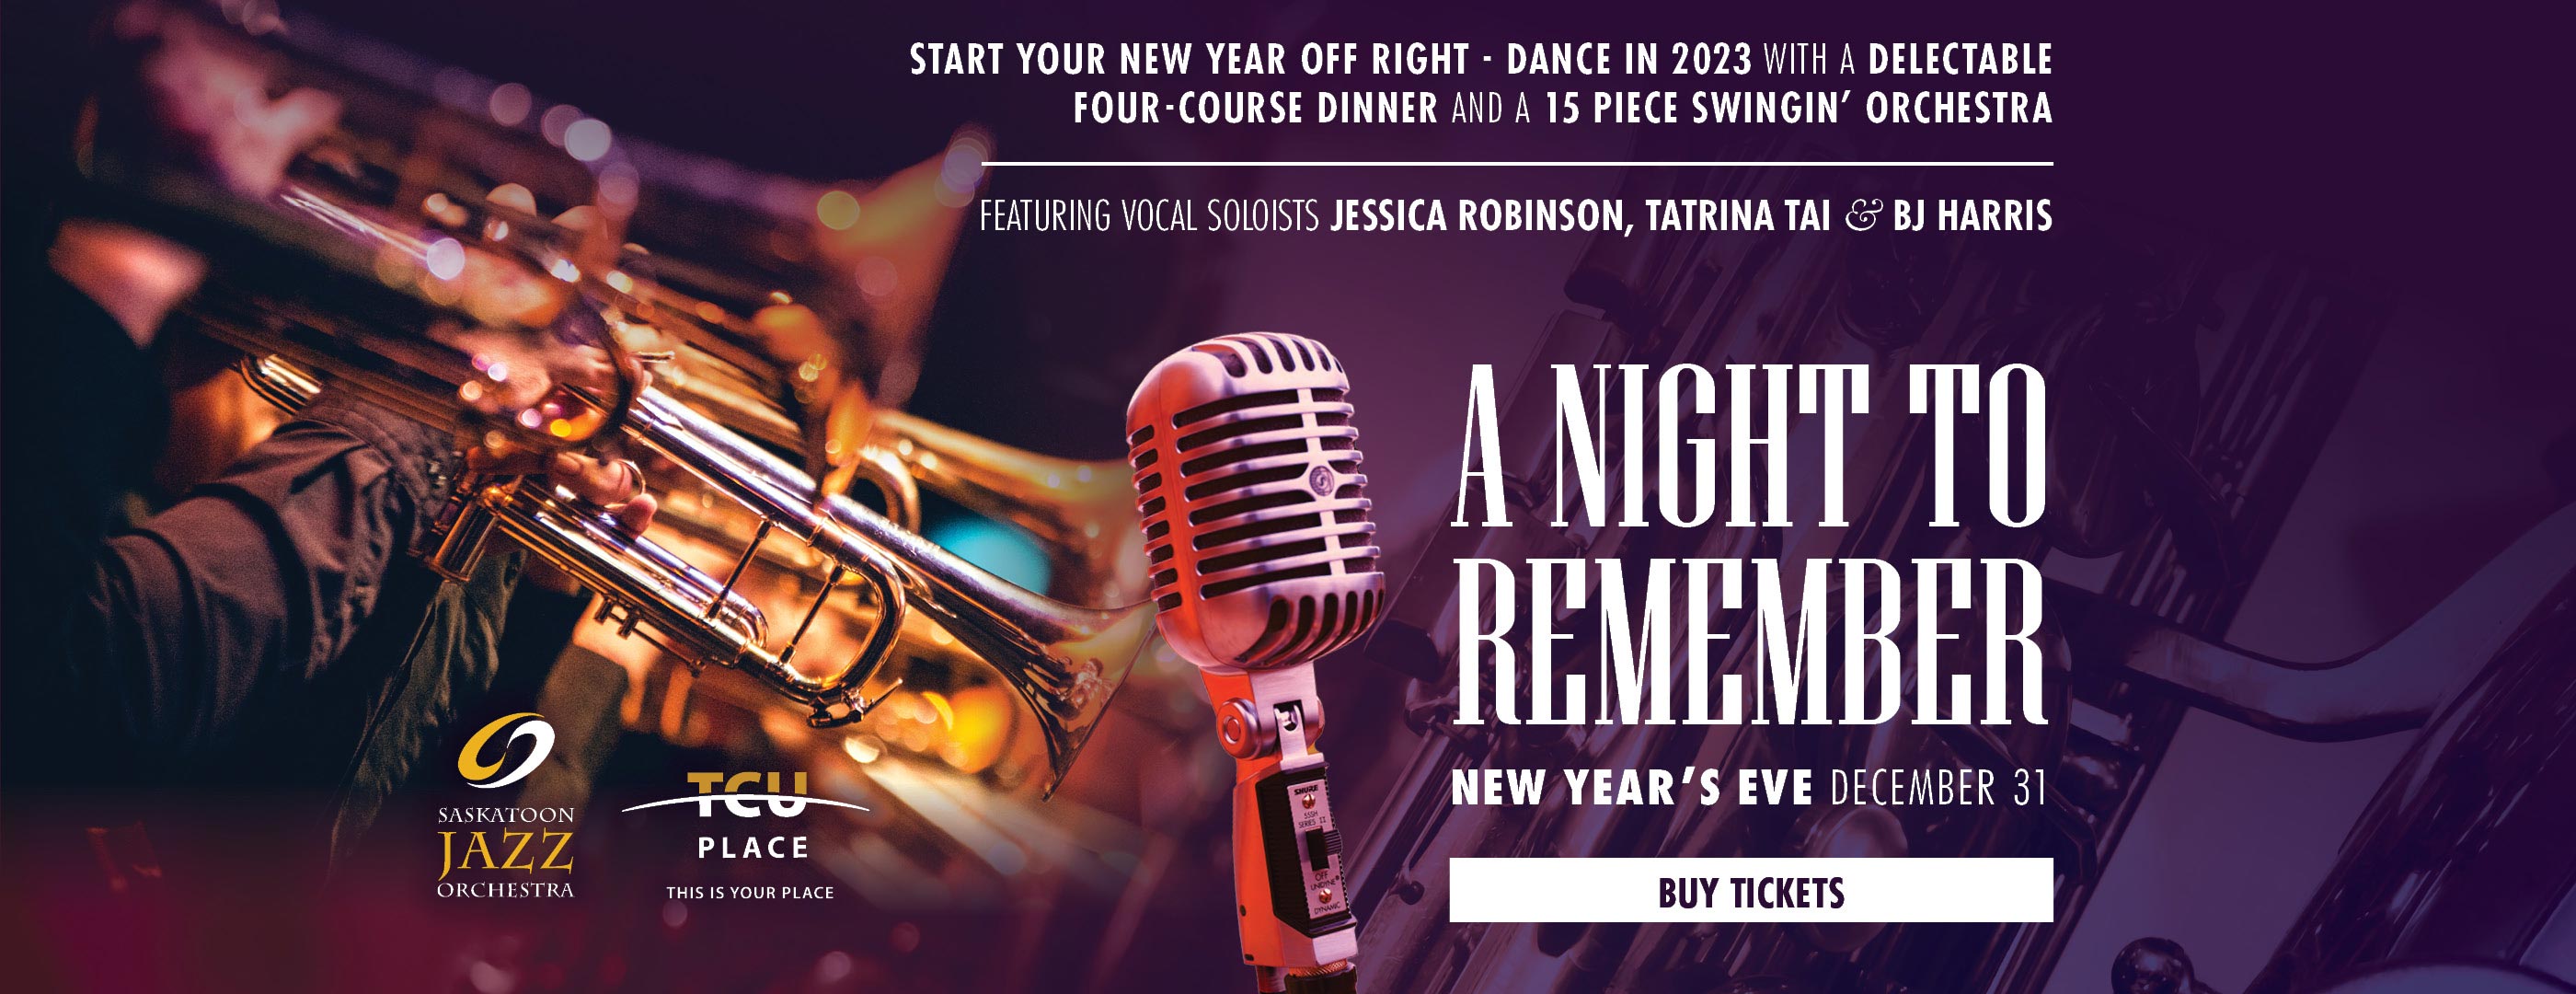 A Night to Remember New Year's Eve Event - Learn More